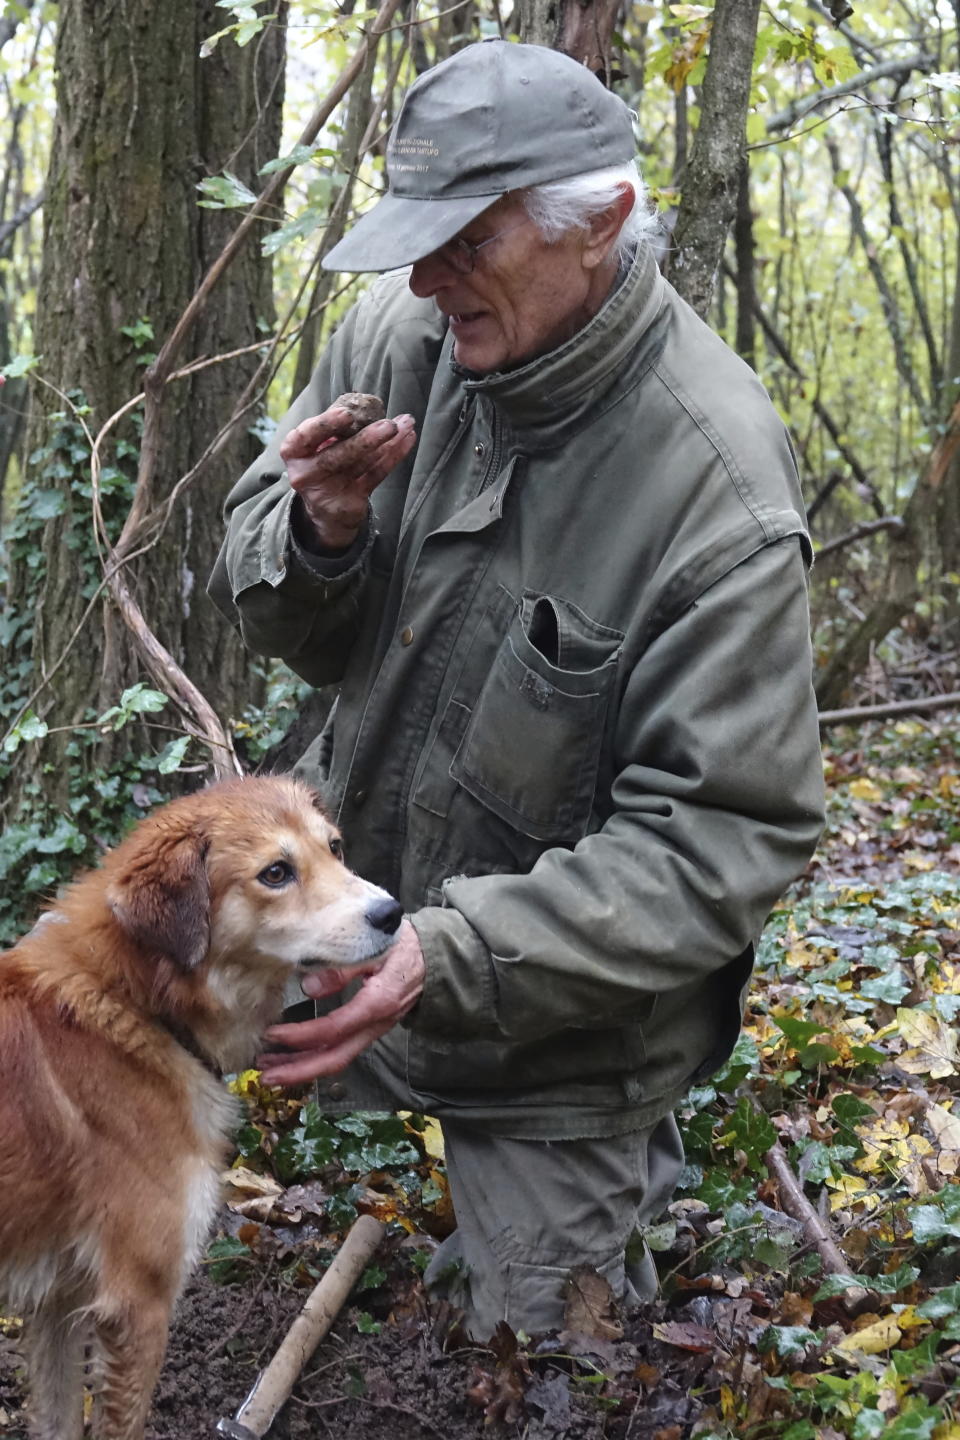 In this photo taken on Sunday, Nov. 10, 2019, Carlo Olivero smells a truffle loosened from the earth in the woods near Alba, Italy. Olivero has been hunting truffles for more than 40 years, and worries about climate change and the transition of wooded land to vineyards and orchards will impoverish future truffle production. (AP Photo/Martino Masotto)